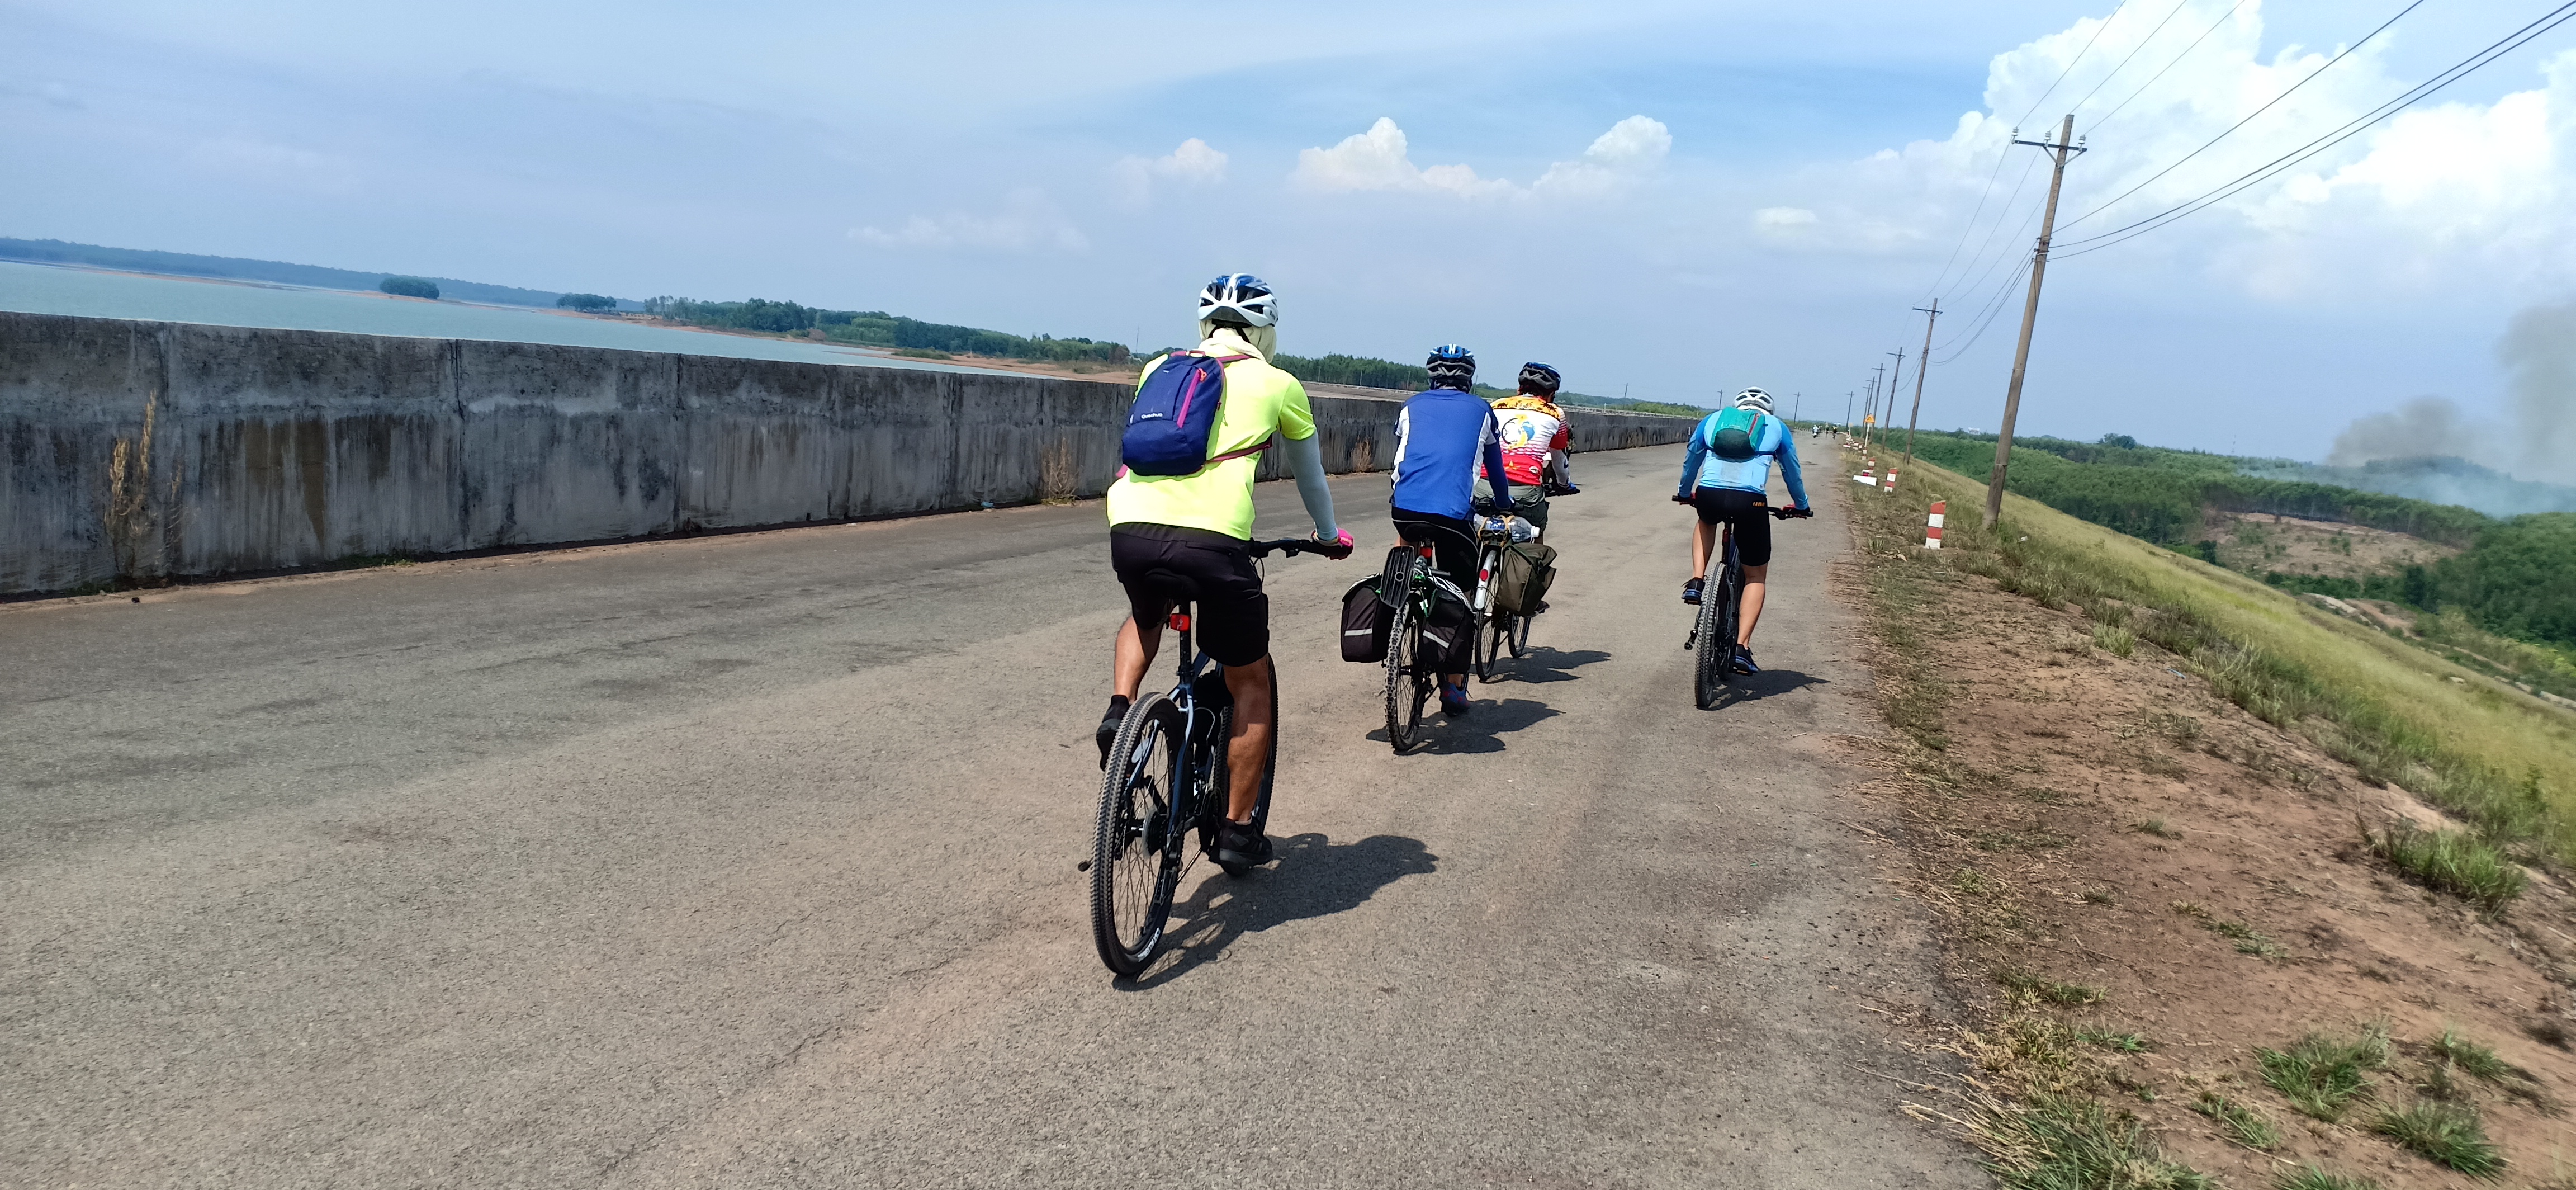 CYCLING TO EXPLORE THE LAKE & FOREST DAY TRIP